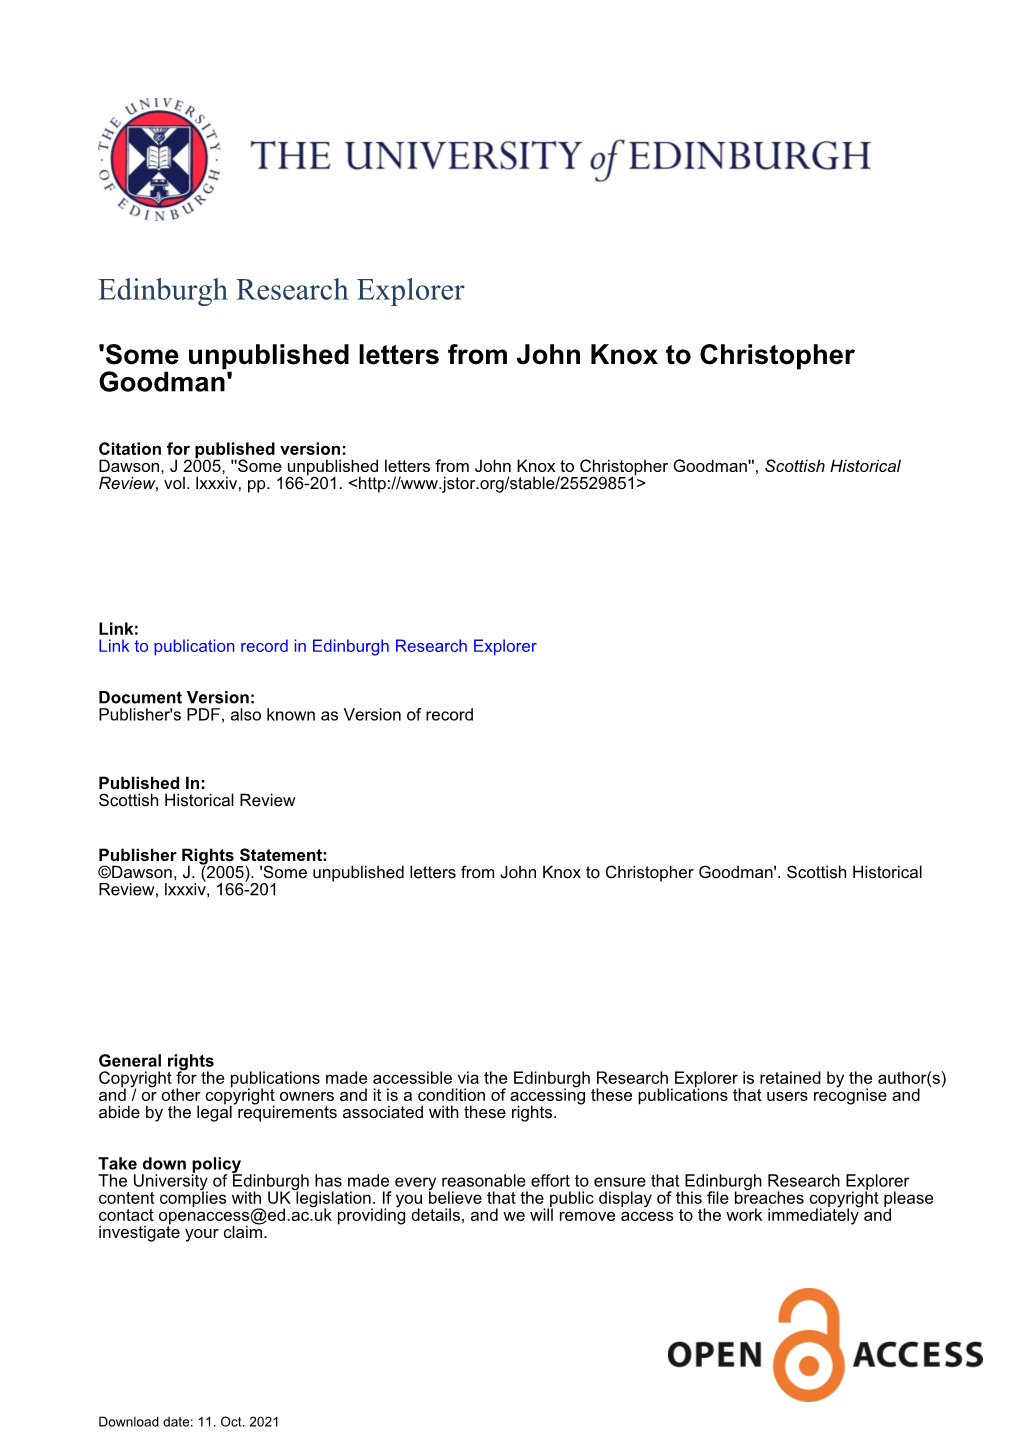 Some Unpublished Letters from John Knox to Christopher Goodman'', Scottish Historical Review, Vol